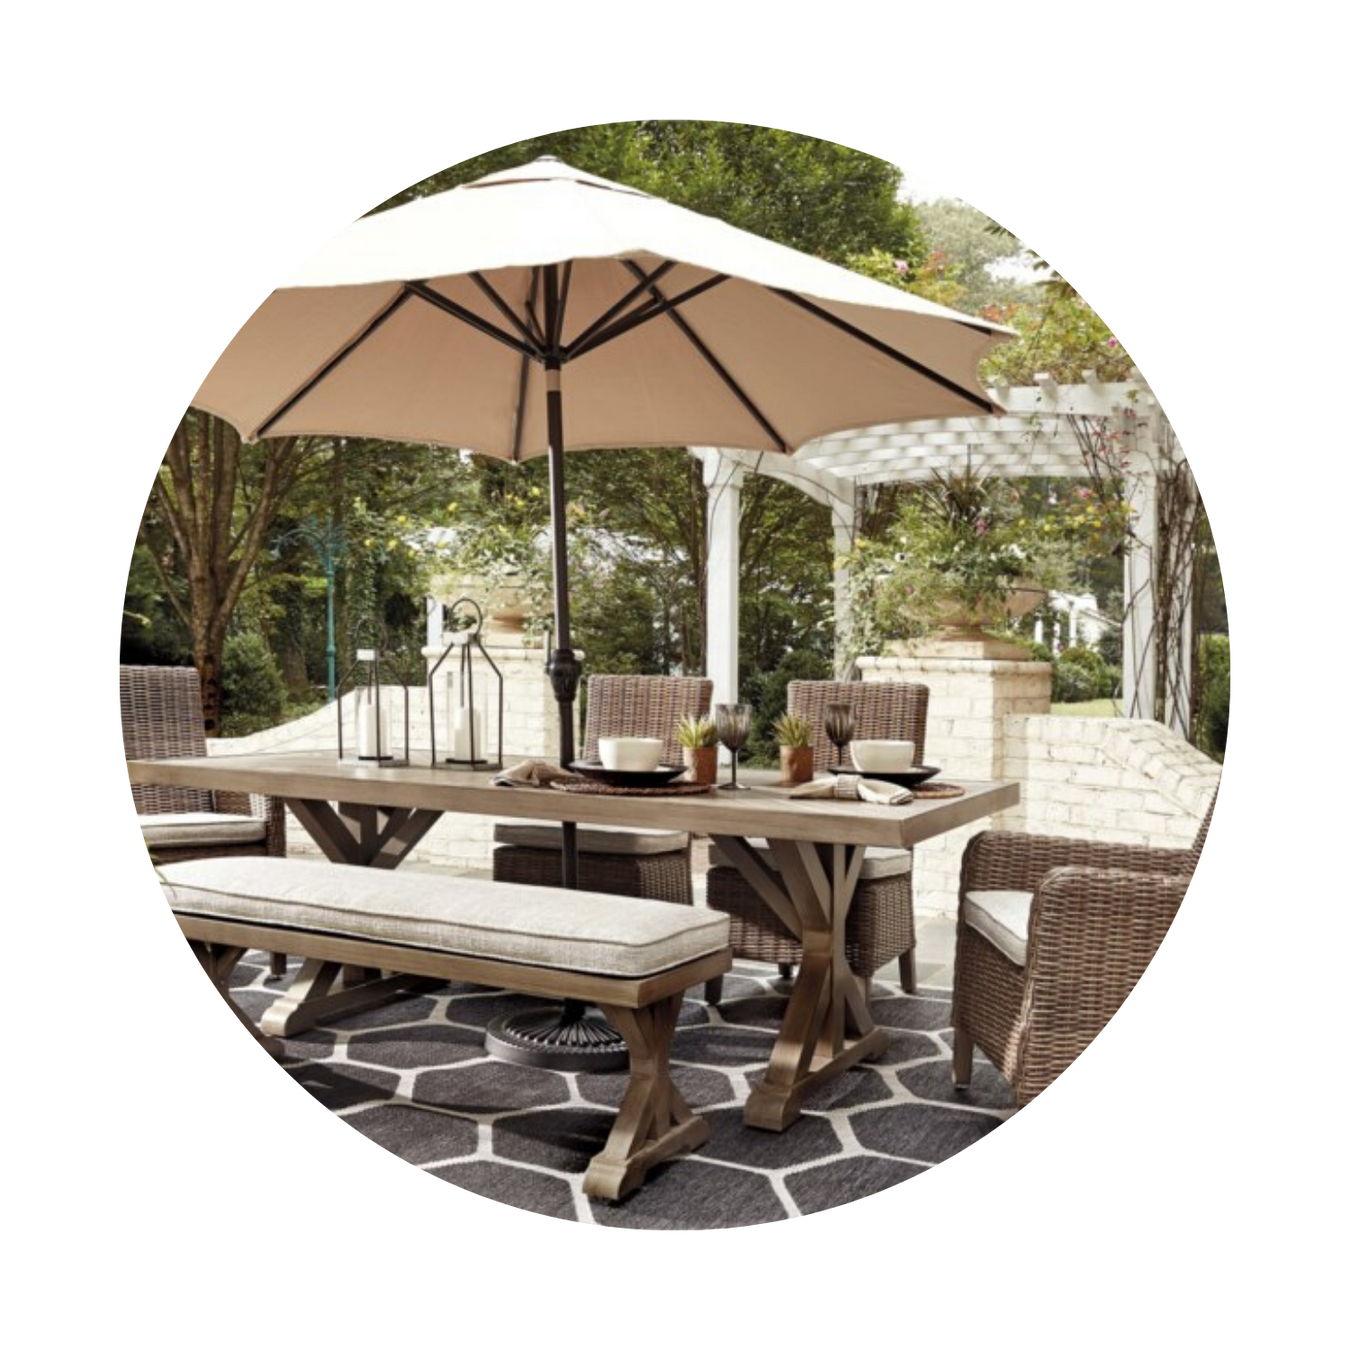 outdoor seating set